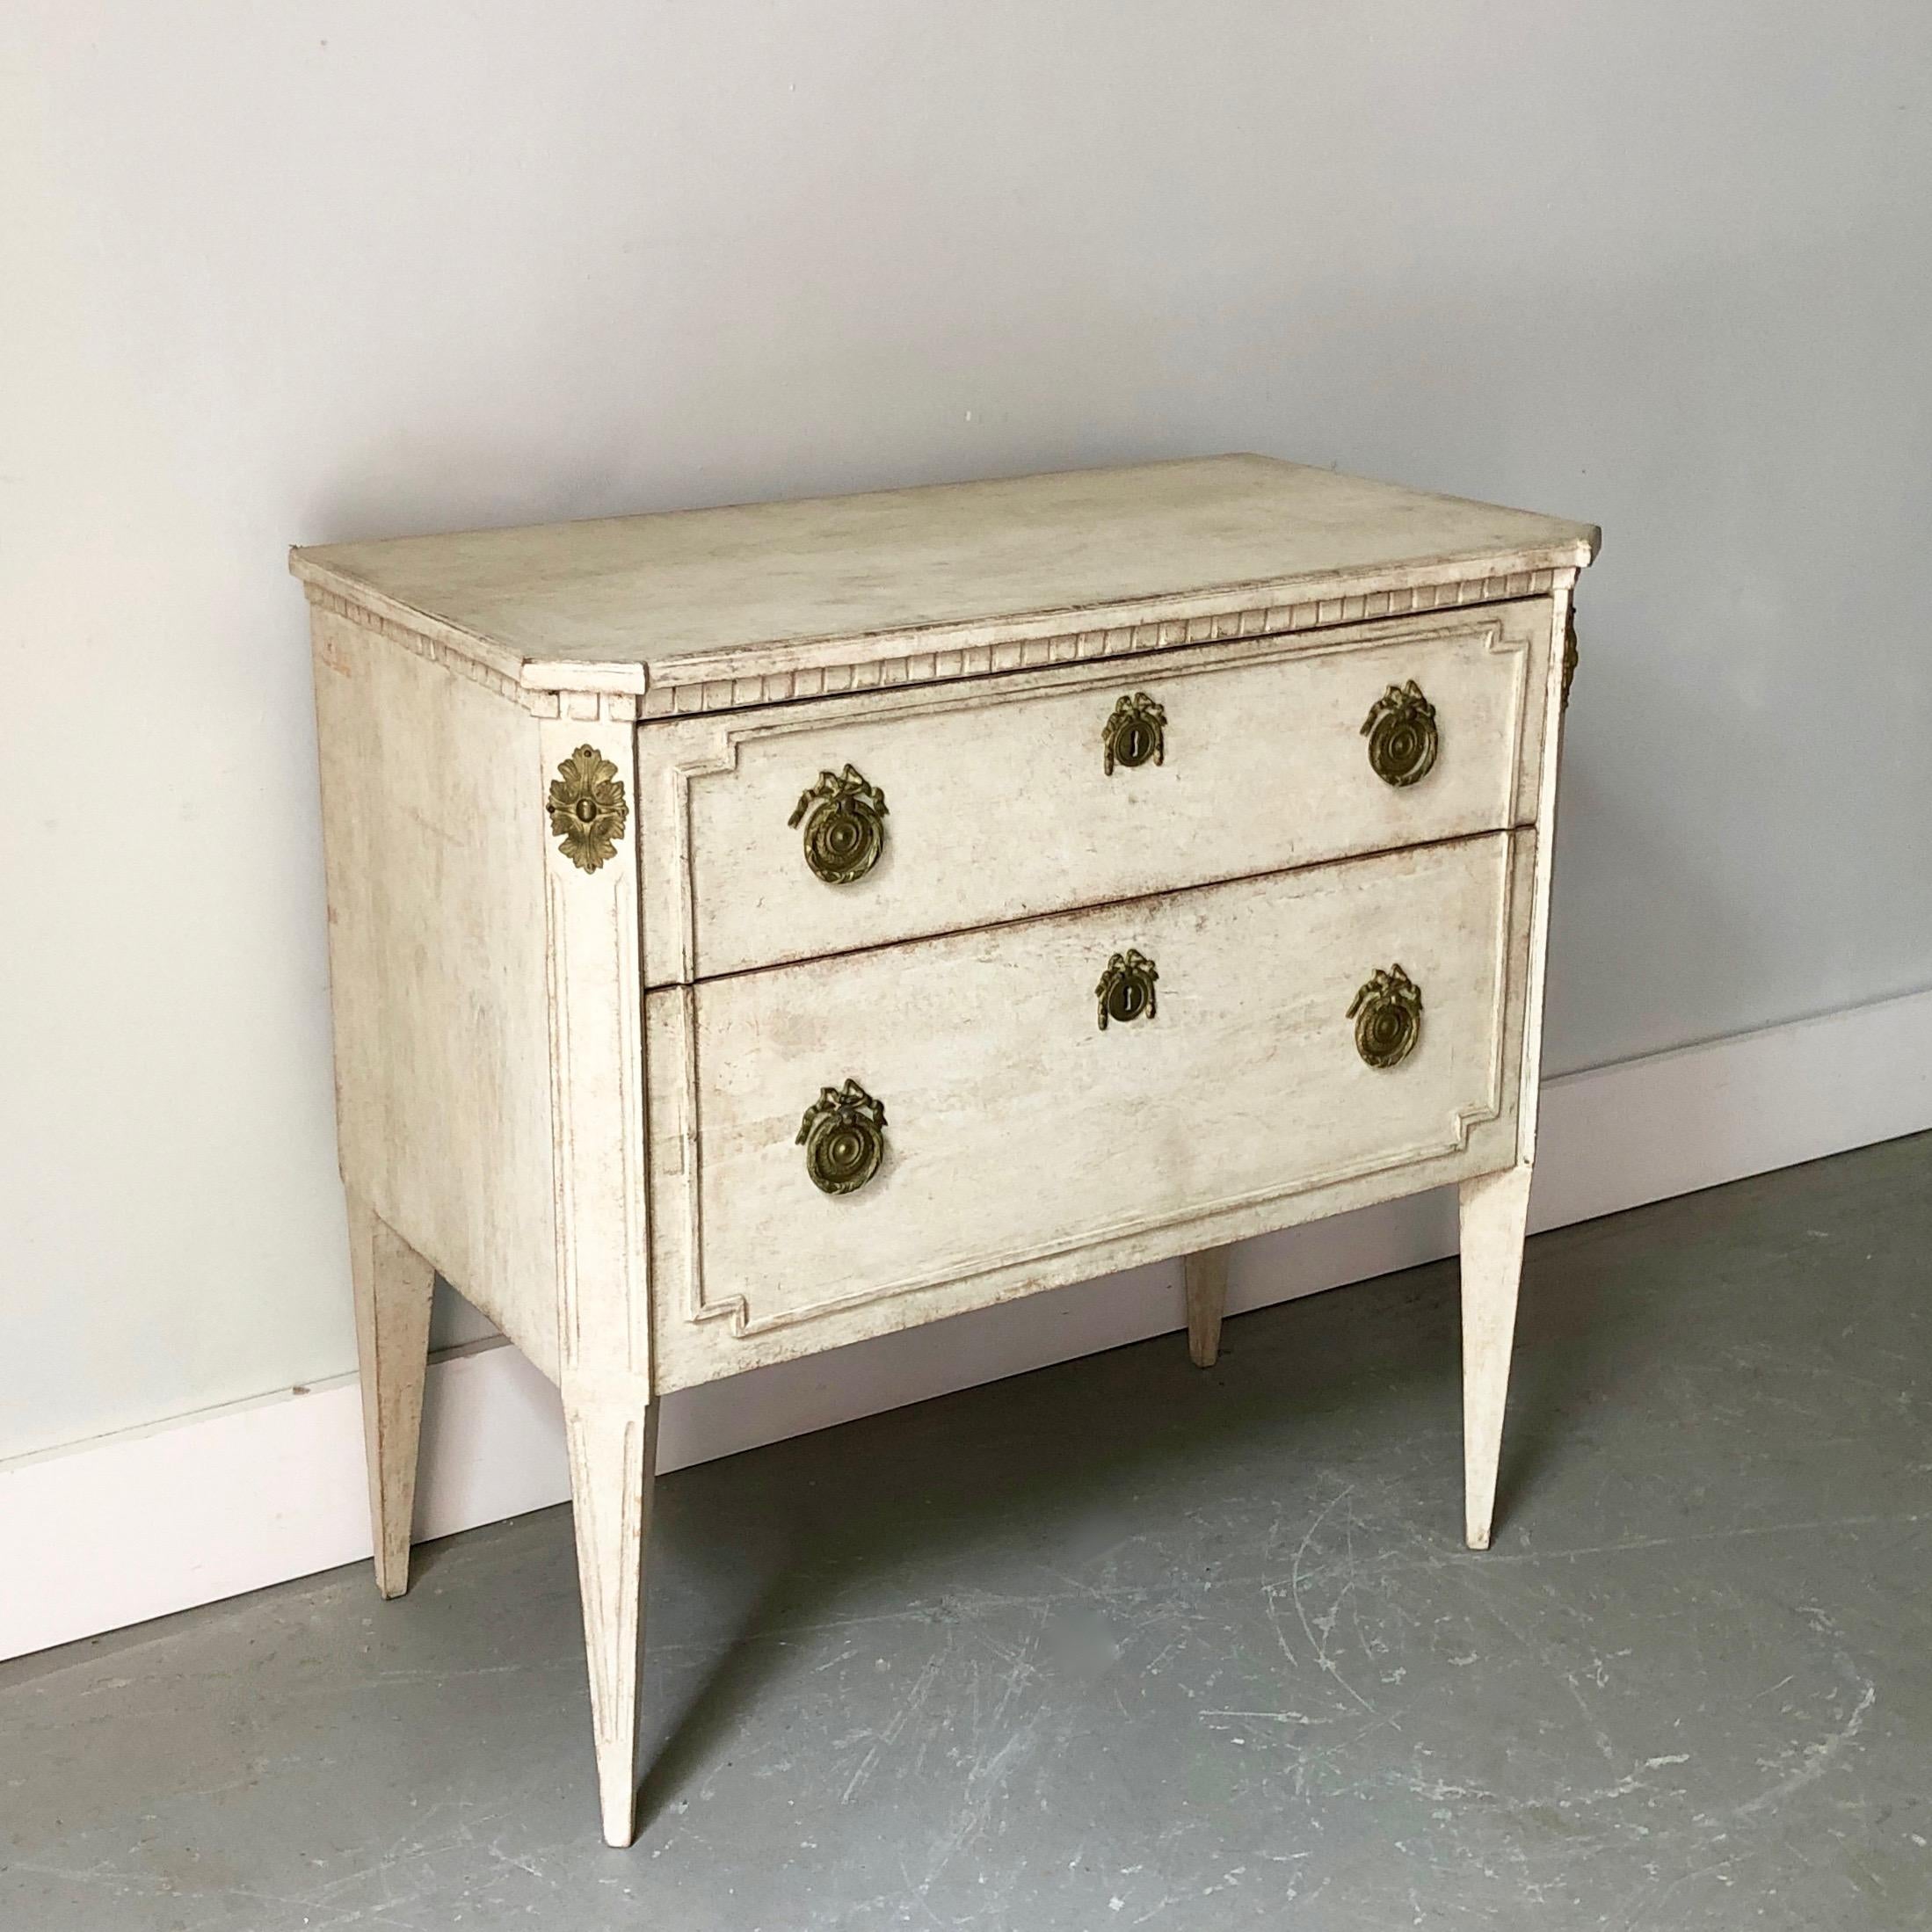 Charming Swedish two-drawer small chest, later paint in creamy white in Gustavian style with raised panels on the driver fronts, shaped top with dentil molding, canted corners, and long tapering legs. Bronze pulls and escutcheons.